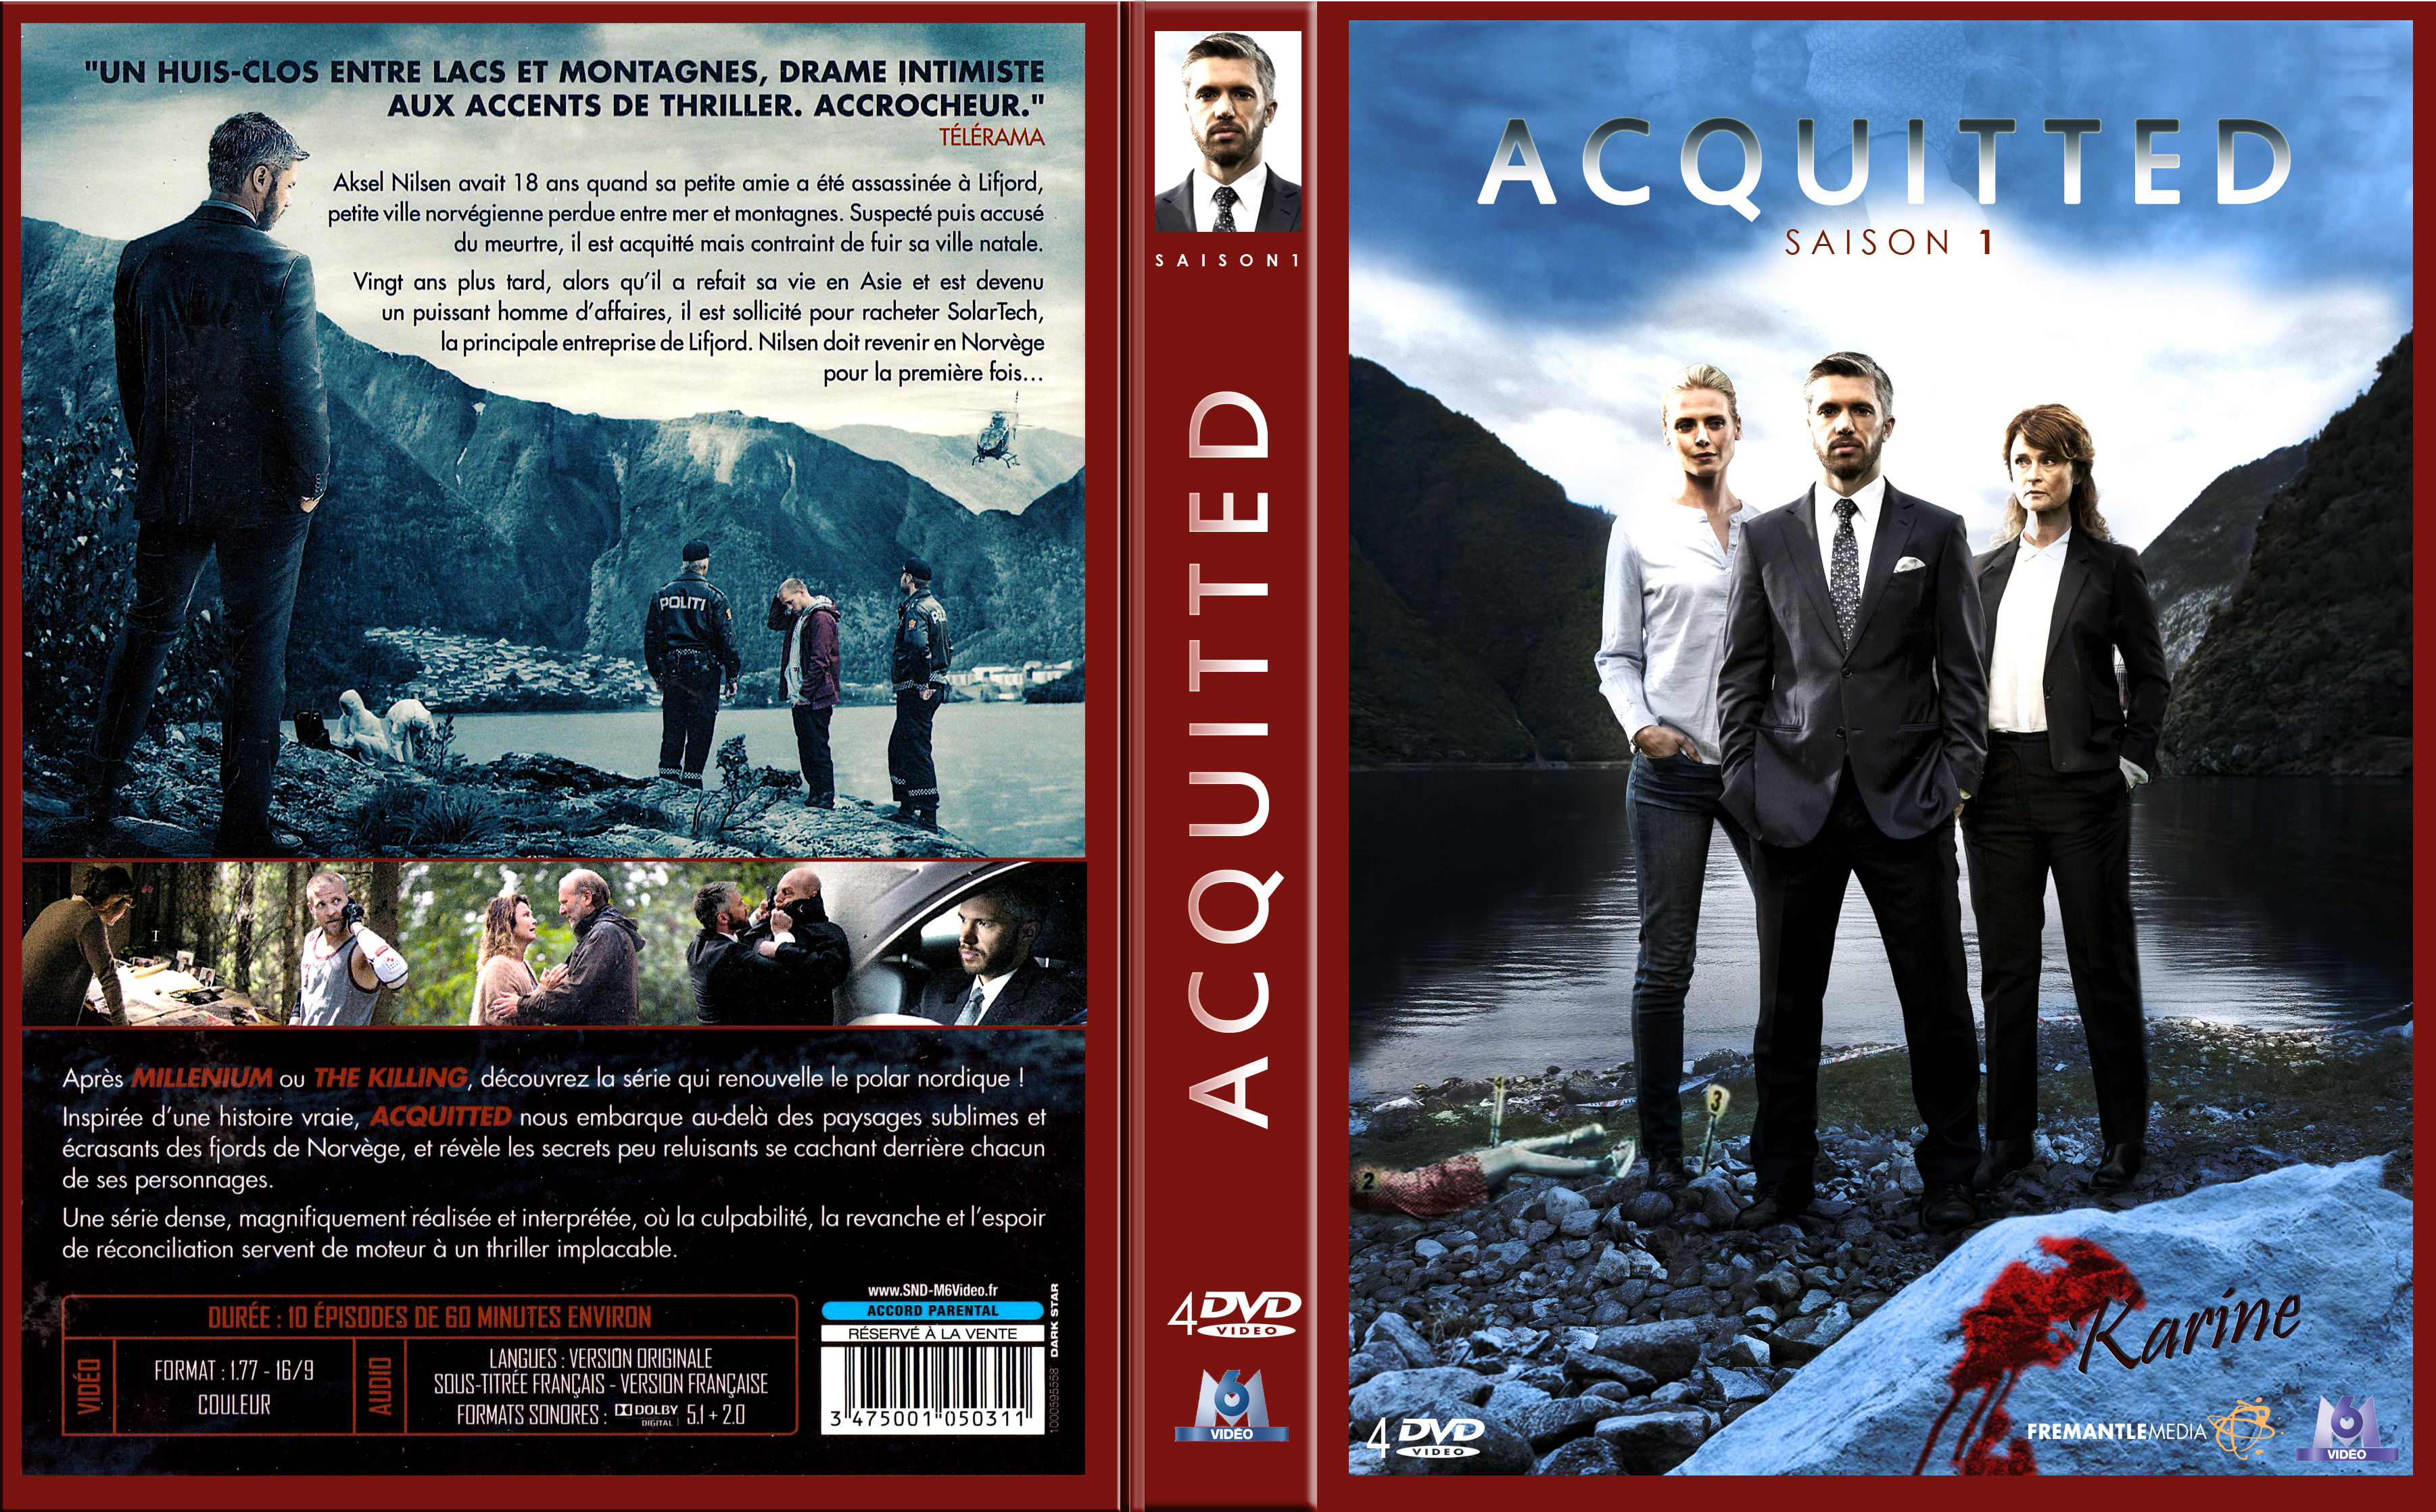 Jaquette DVD Acquitted Saion 1